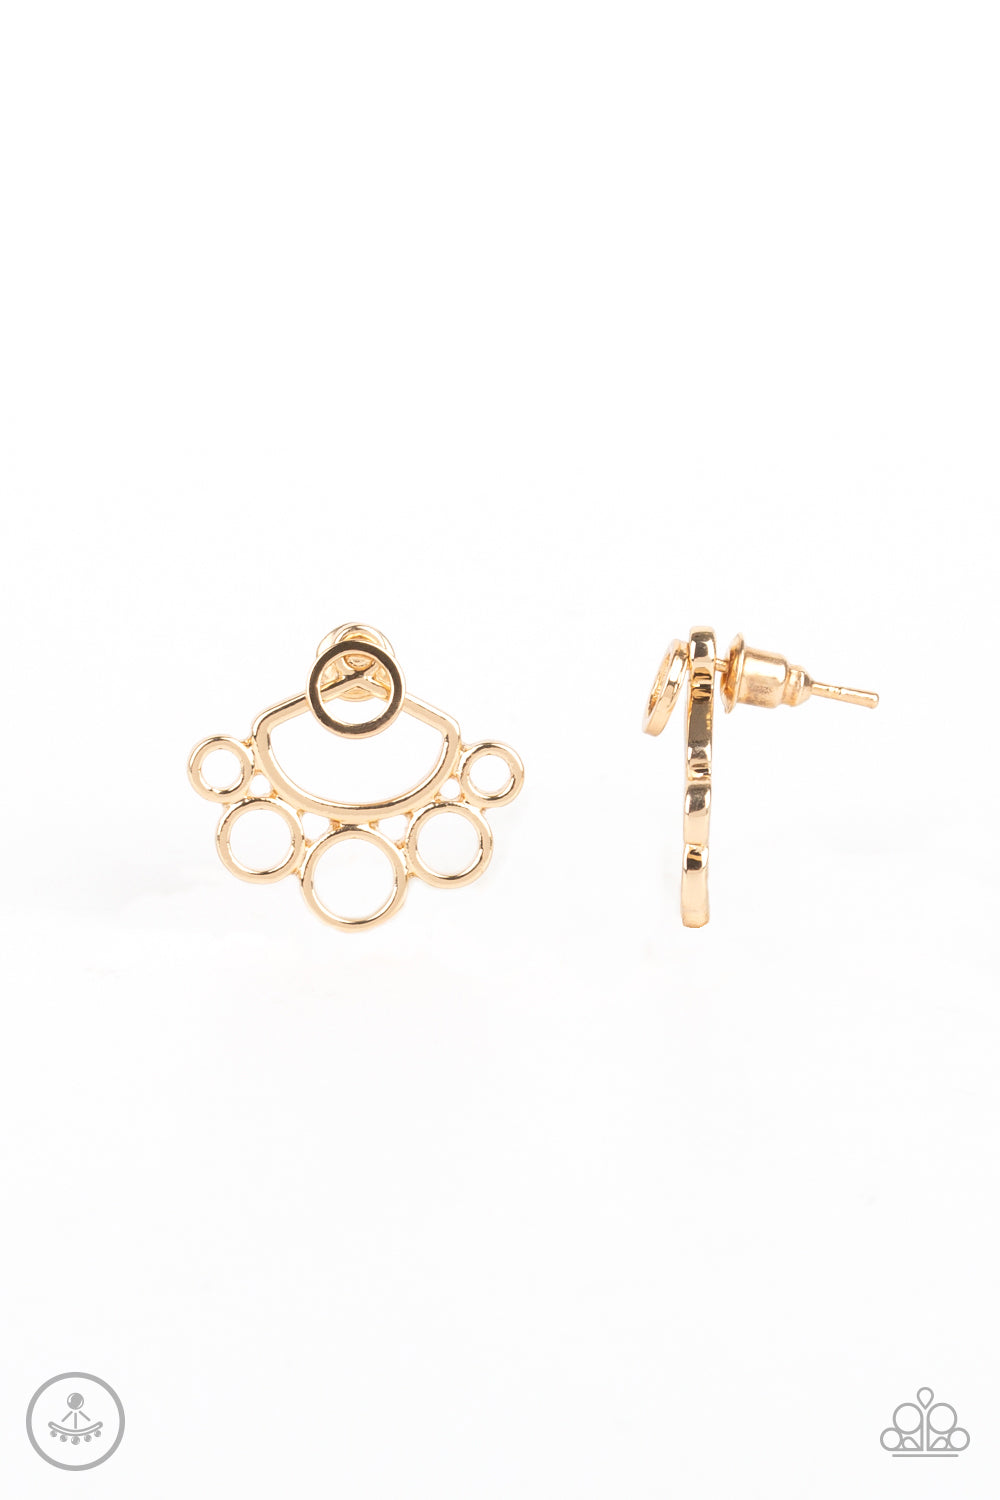 pittmanbling-and-jewelry-inc-presentscompletely-surrounded-gold-post earrings-paparazzi-accessories